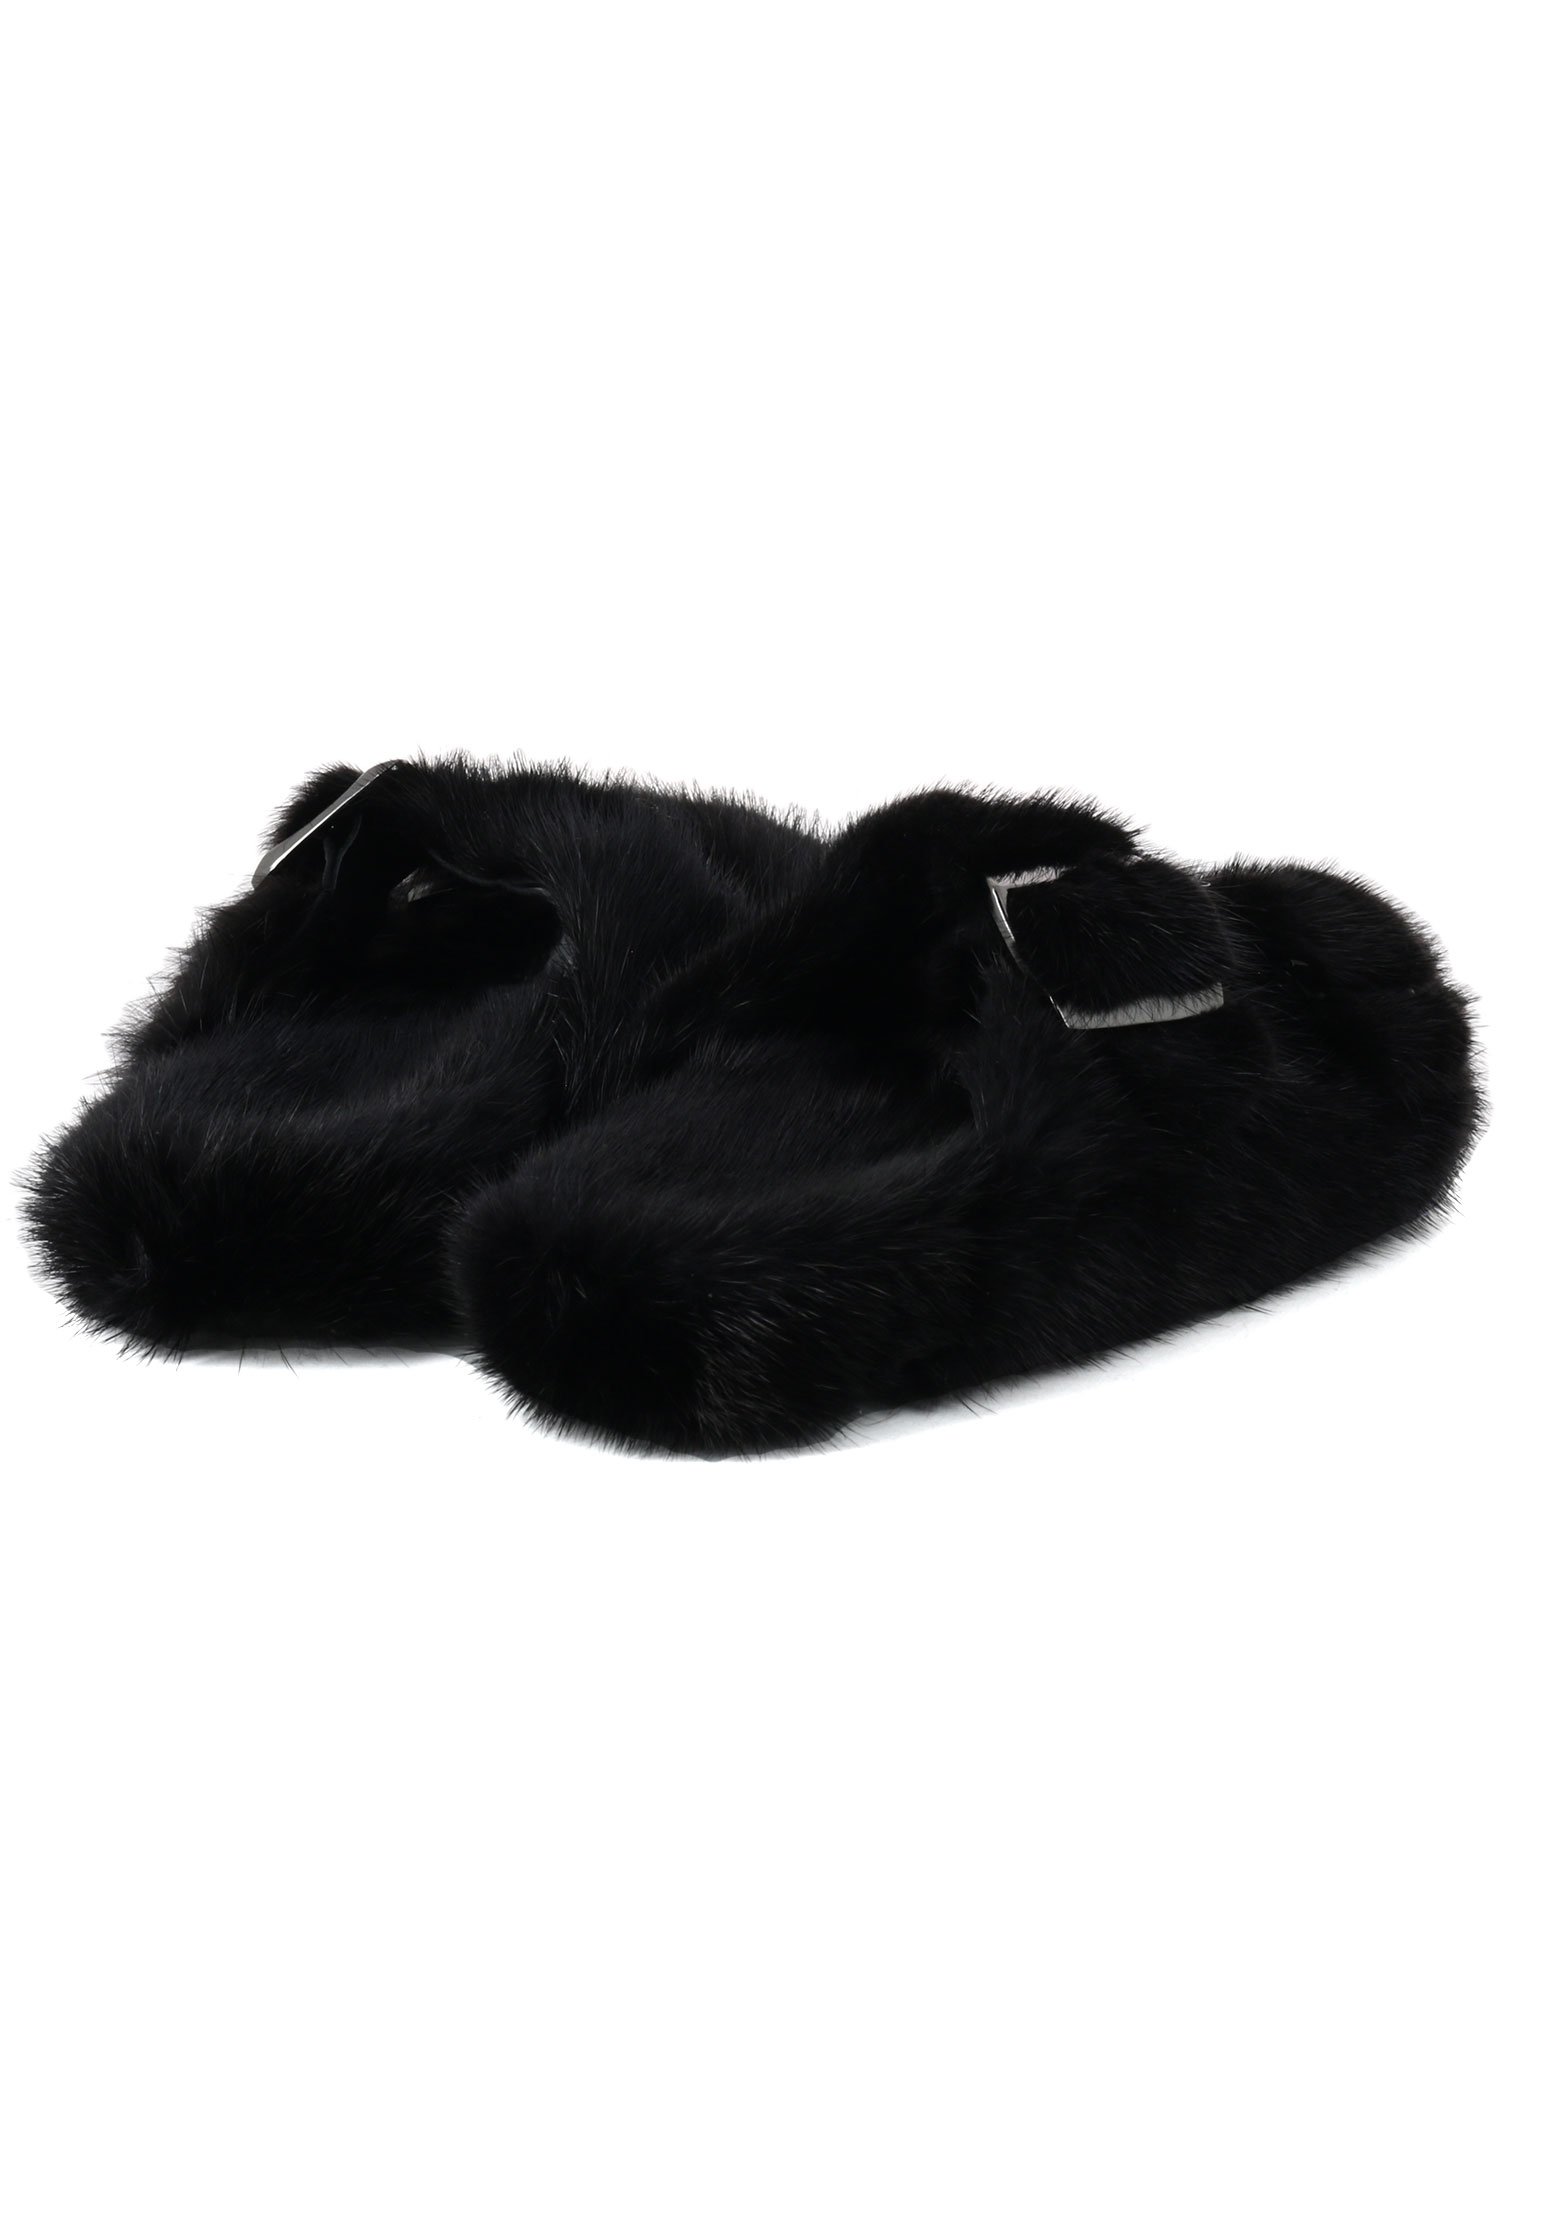 Slippers SAM RONE Color: black (Code: 217) in online store Allure